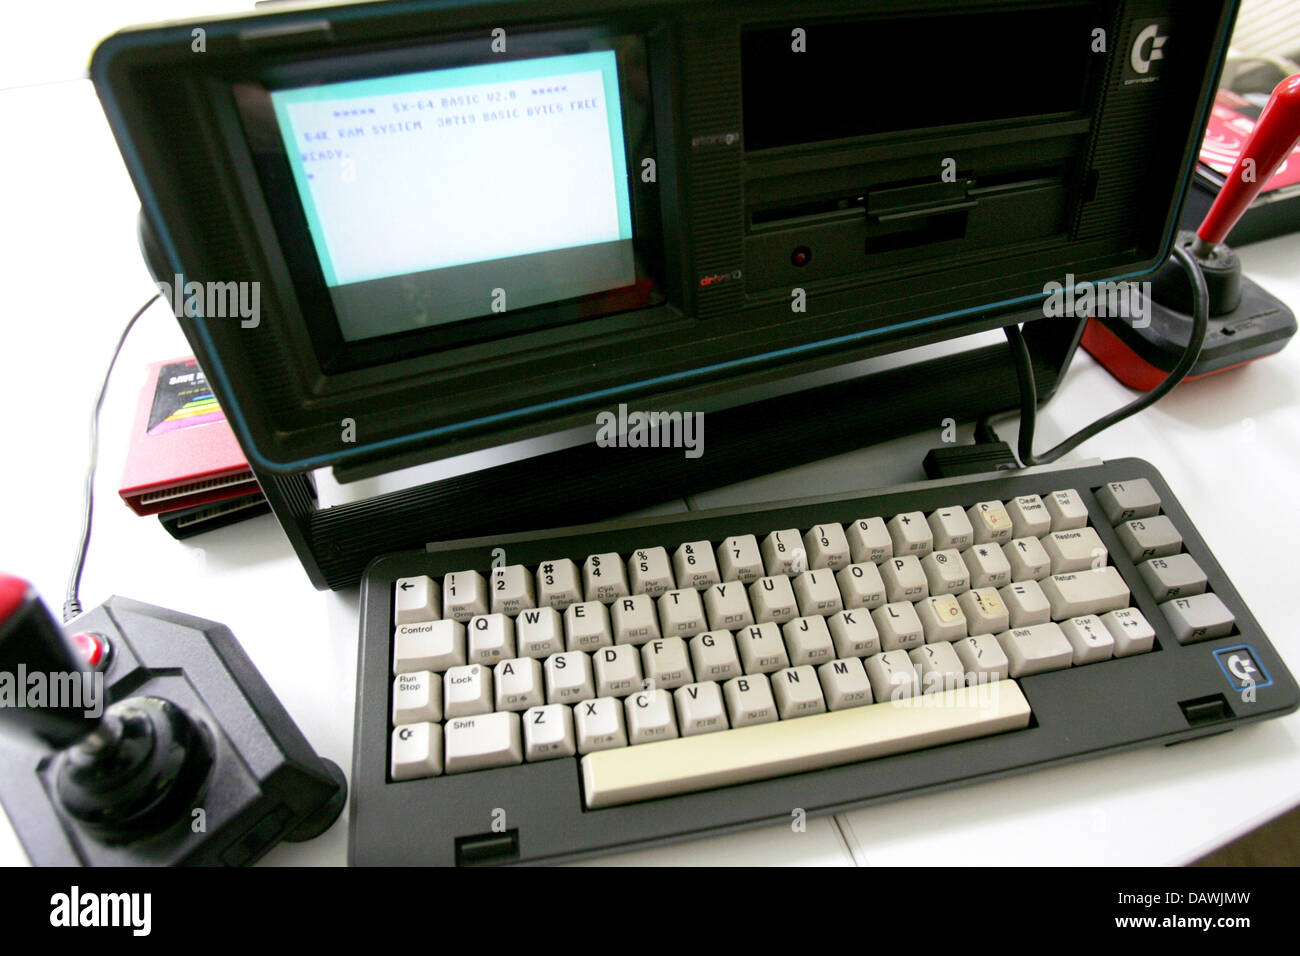 A Commodore SX-64 pictured at a press conference in Munich, Germany, 24 April 2007. The SX-64 built between 1983 and 1986 was the first portable computer that included a 5' colour screen. Unfortunately it did not include a rechargeable battery. Photo: Lukas Barth Stock Photo